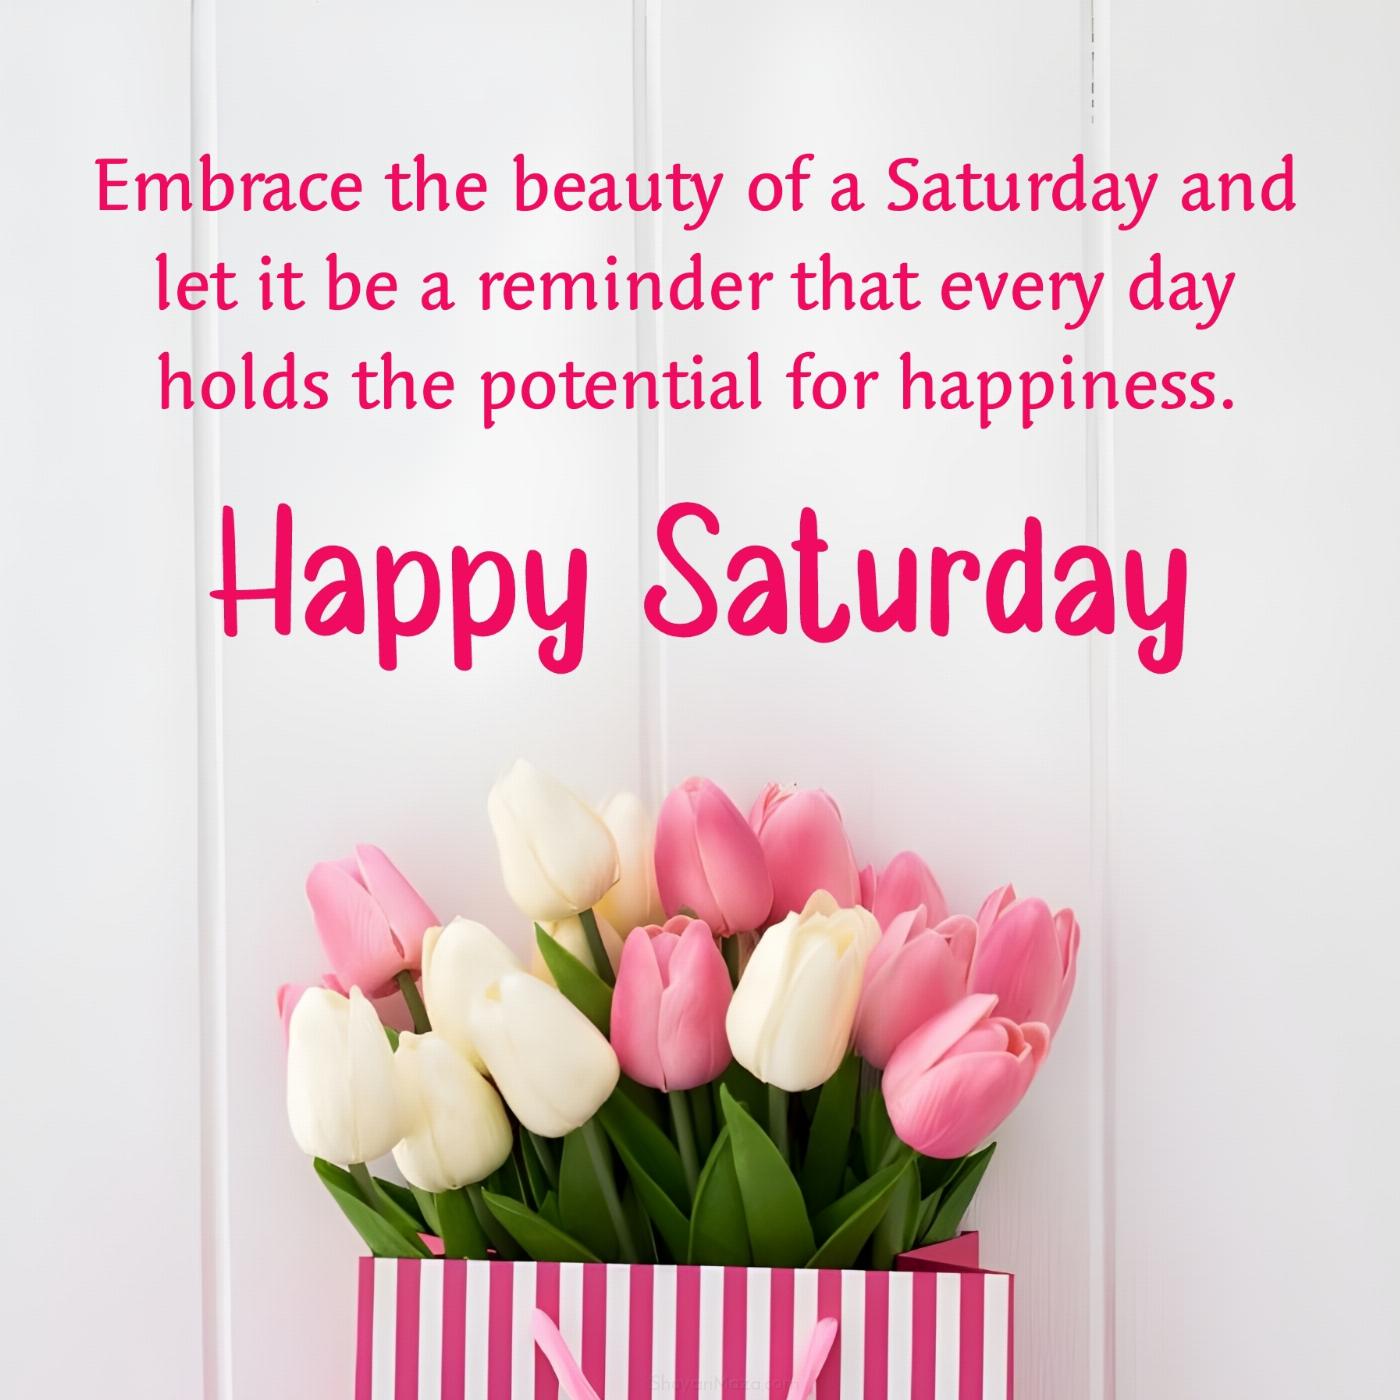 Embrace the beauty of a Saturday and let it be a reminder